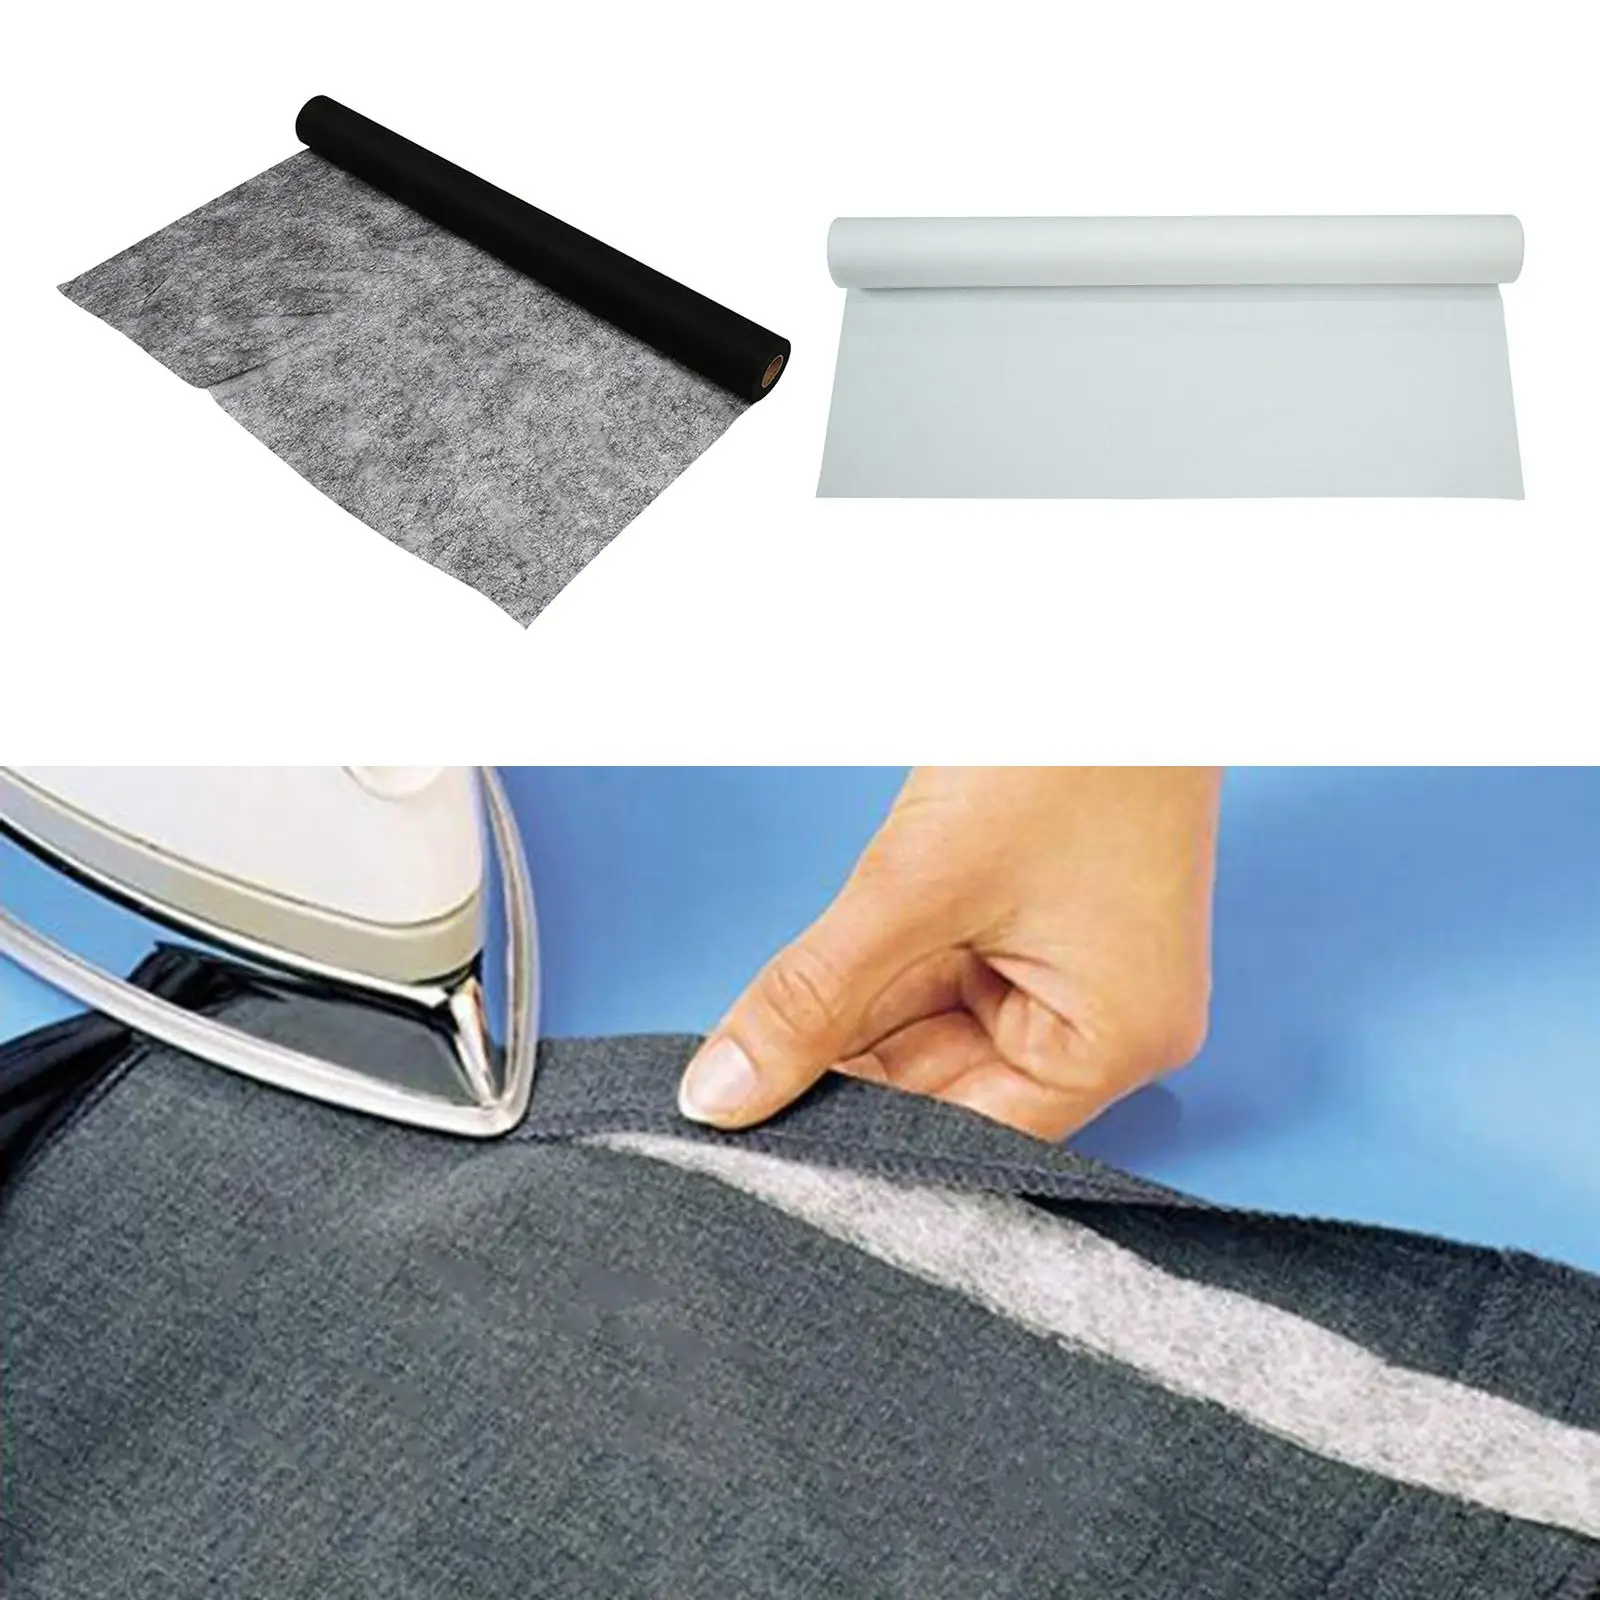 Fixing Liners, Non-Woven Polyester Bonding Fabric Double Sided Iron on Bonding for DIY Supplies (44 Inches X 6.6 Yards)